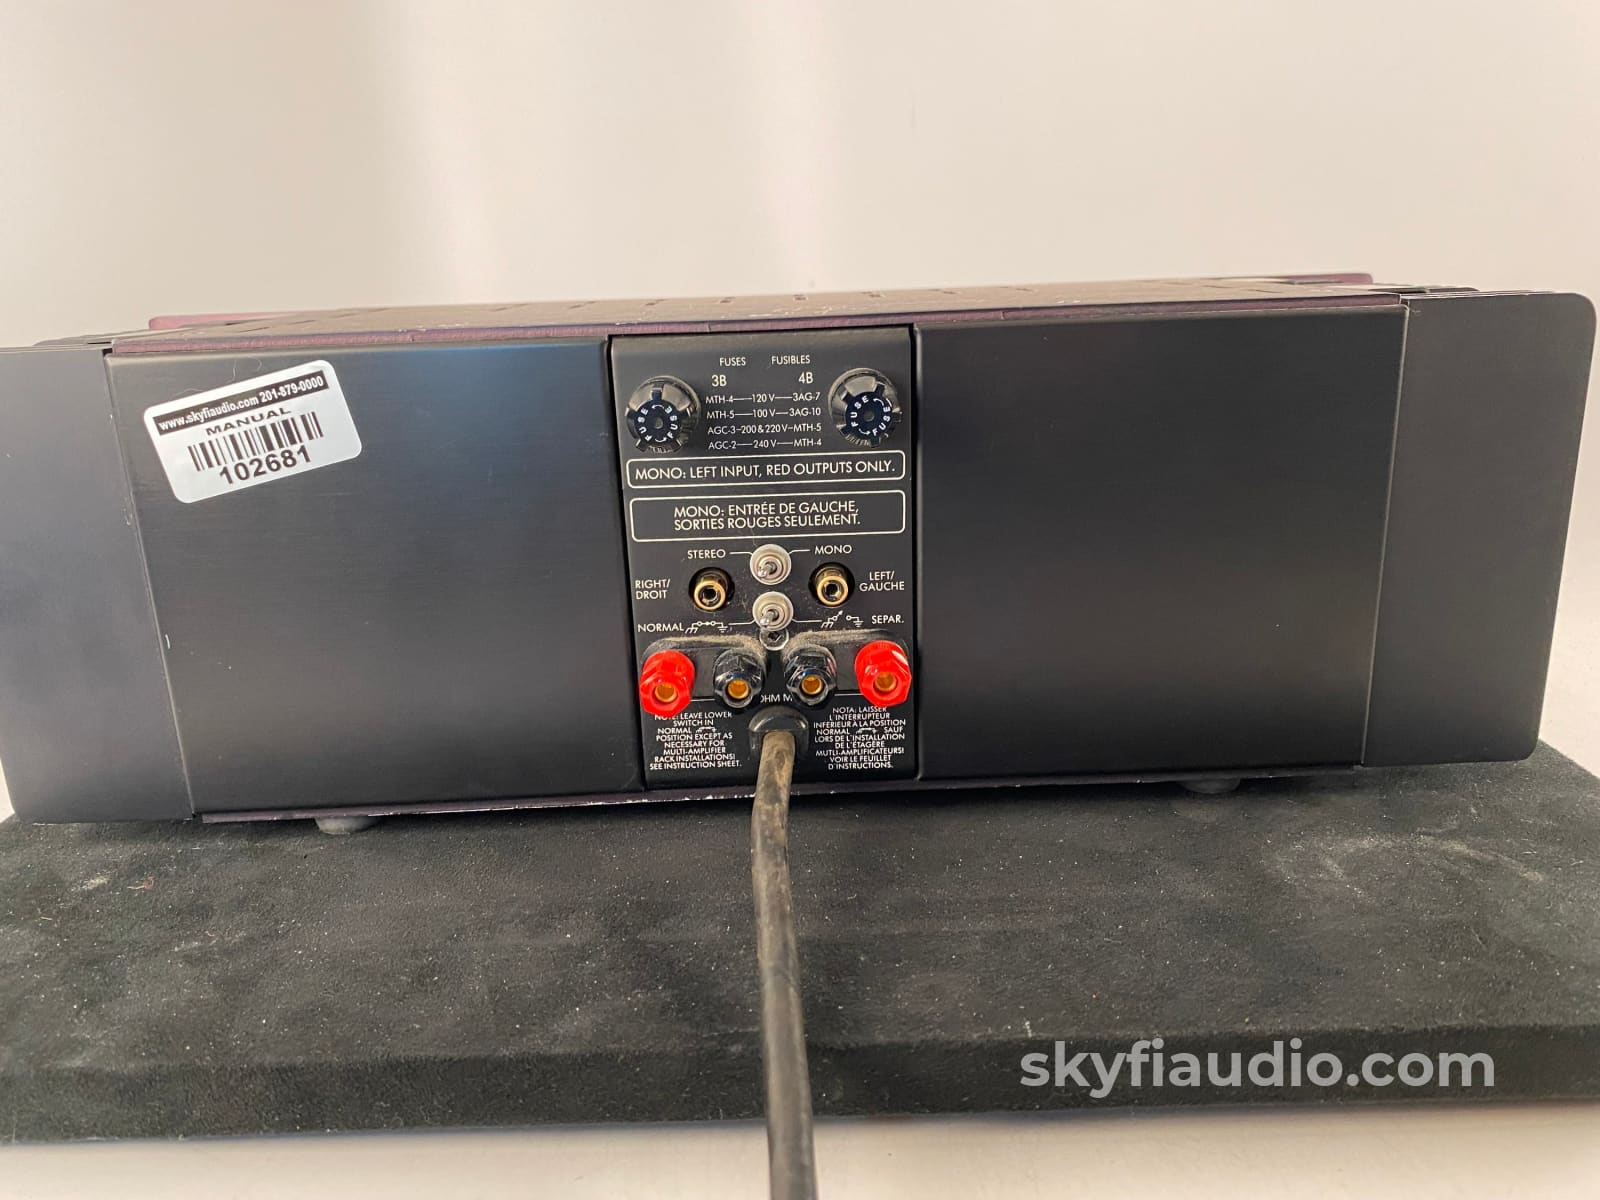 Bryston 3B Solid State Stereo Amplifier